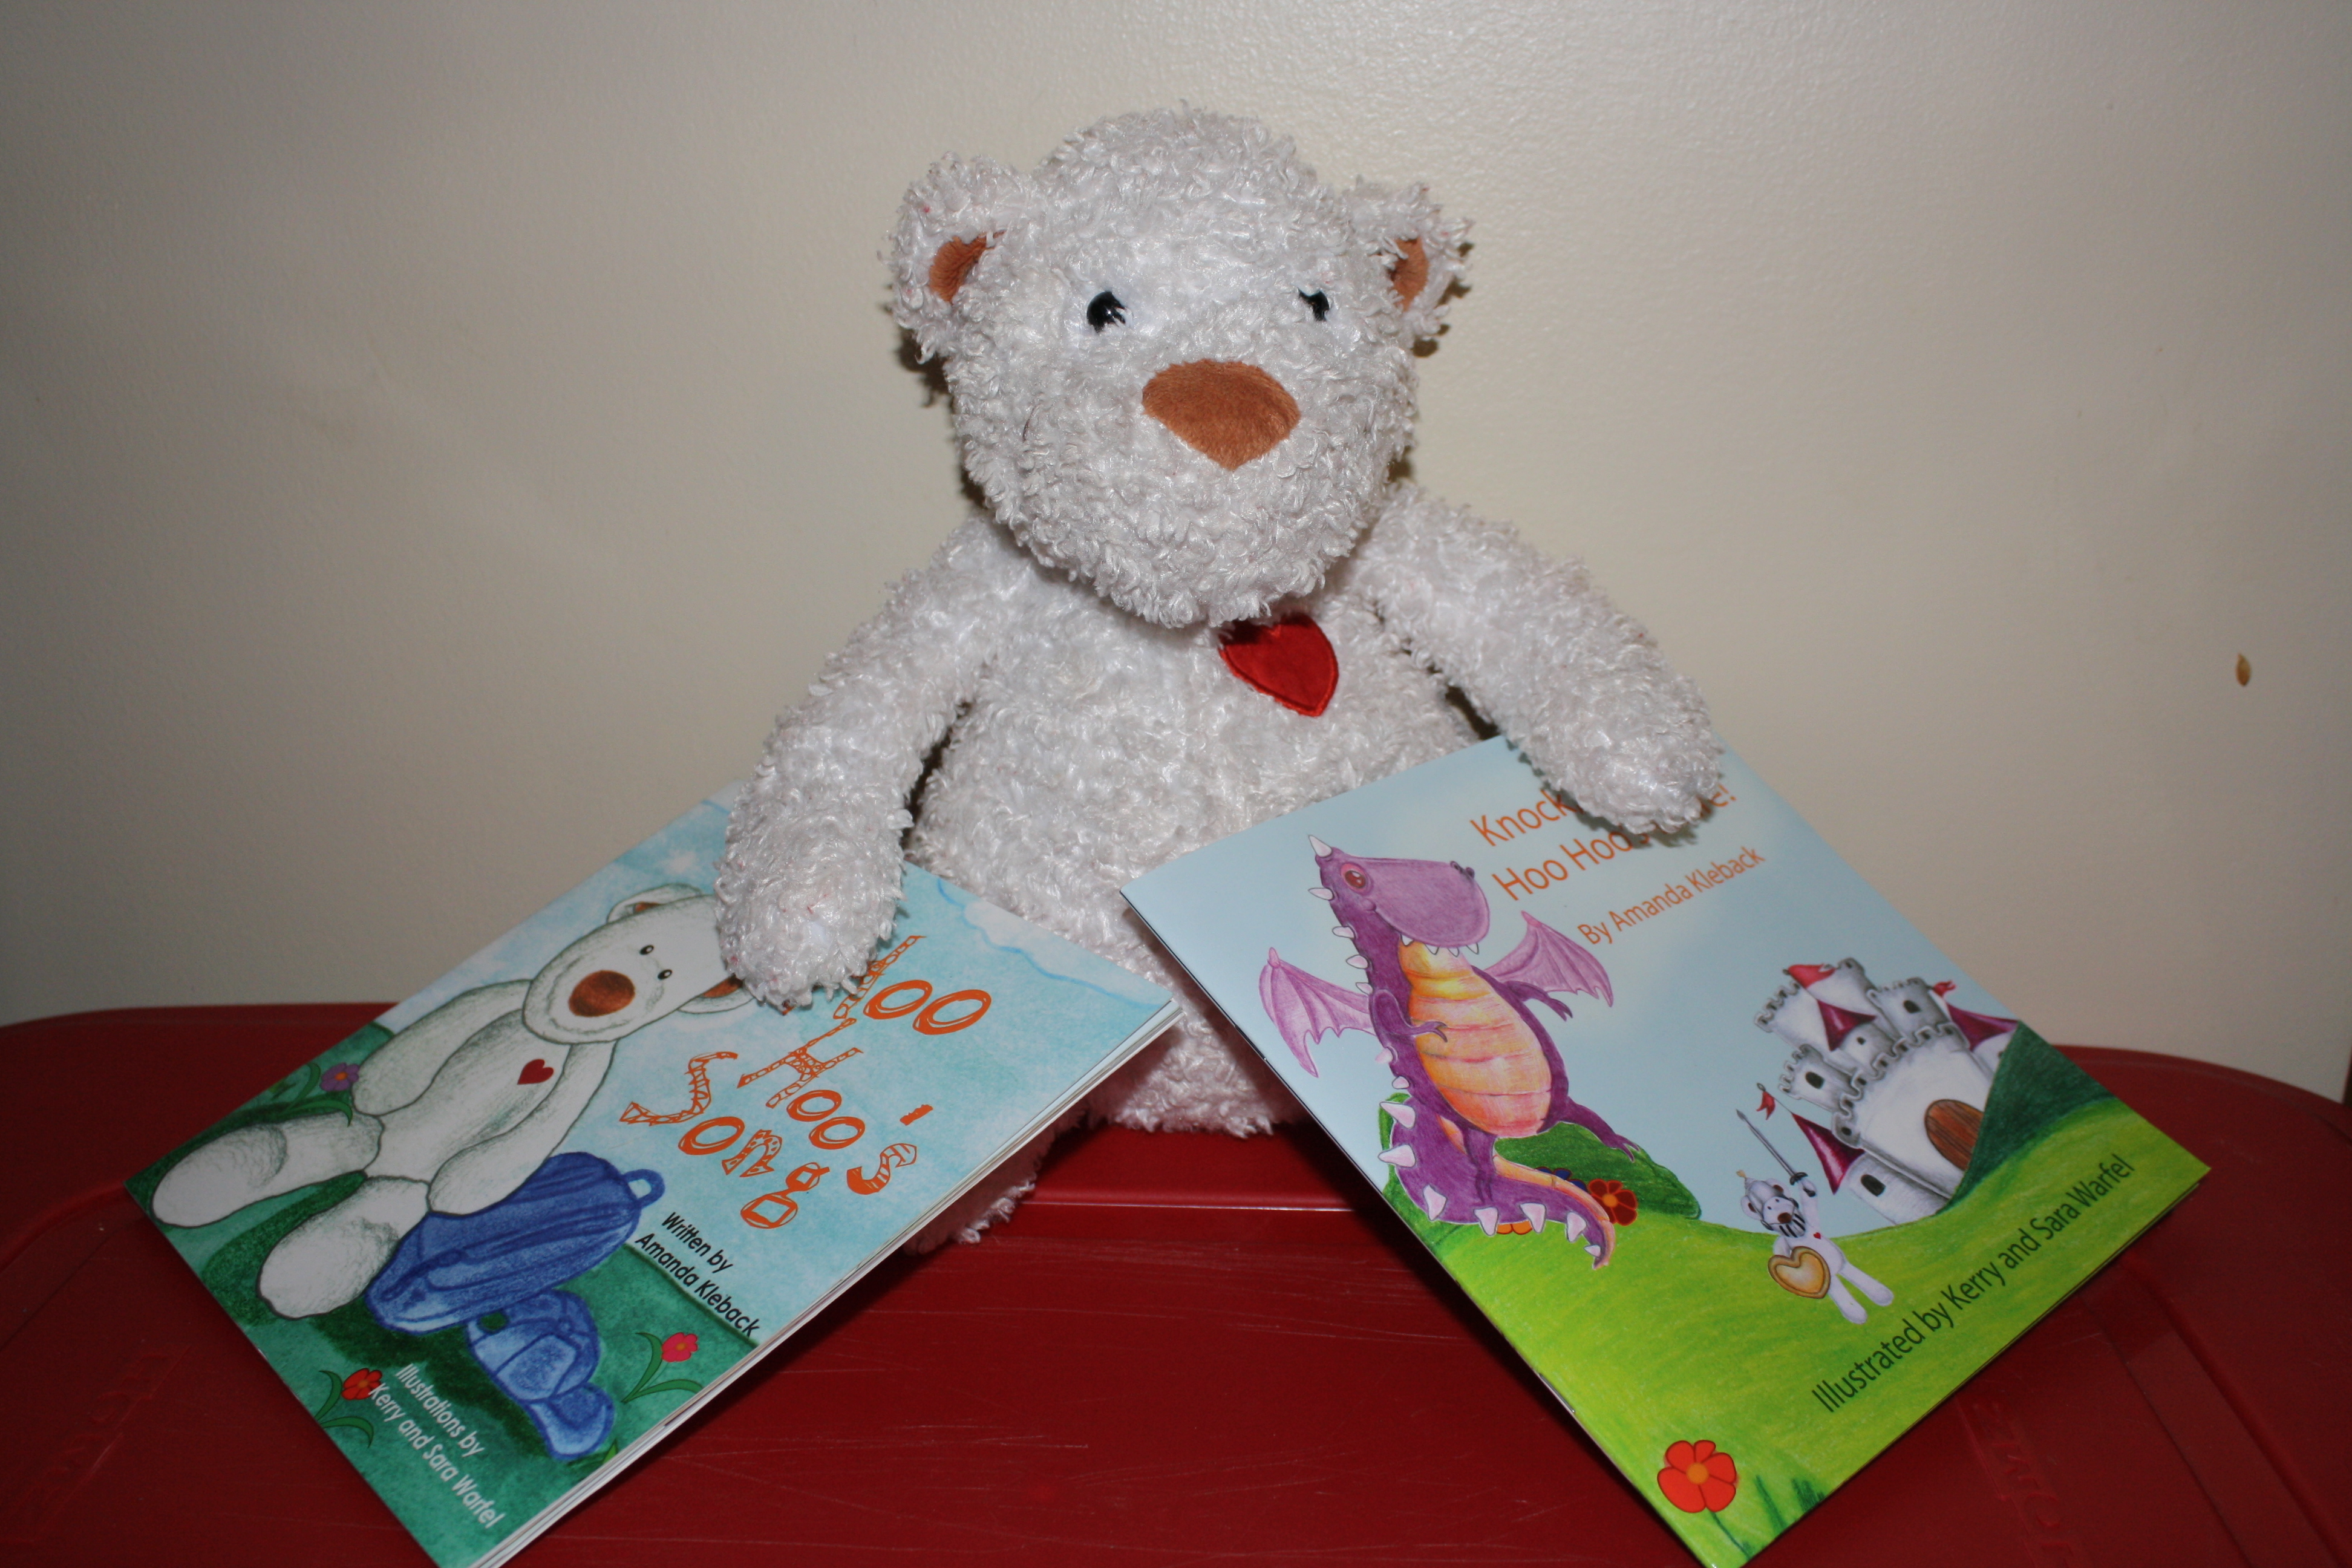 Hoo Hoo The Bear Book and Plush Review and Giveaway! Ends 4/2/13!